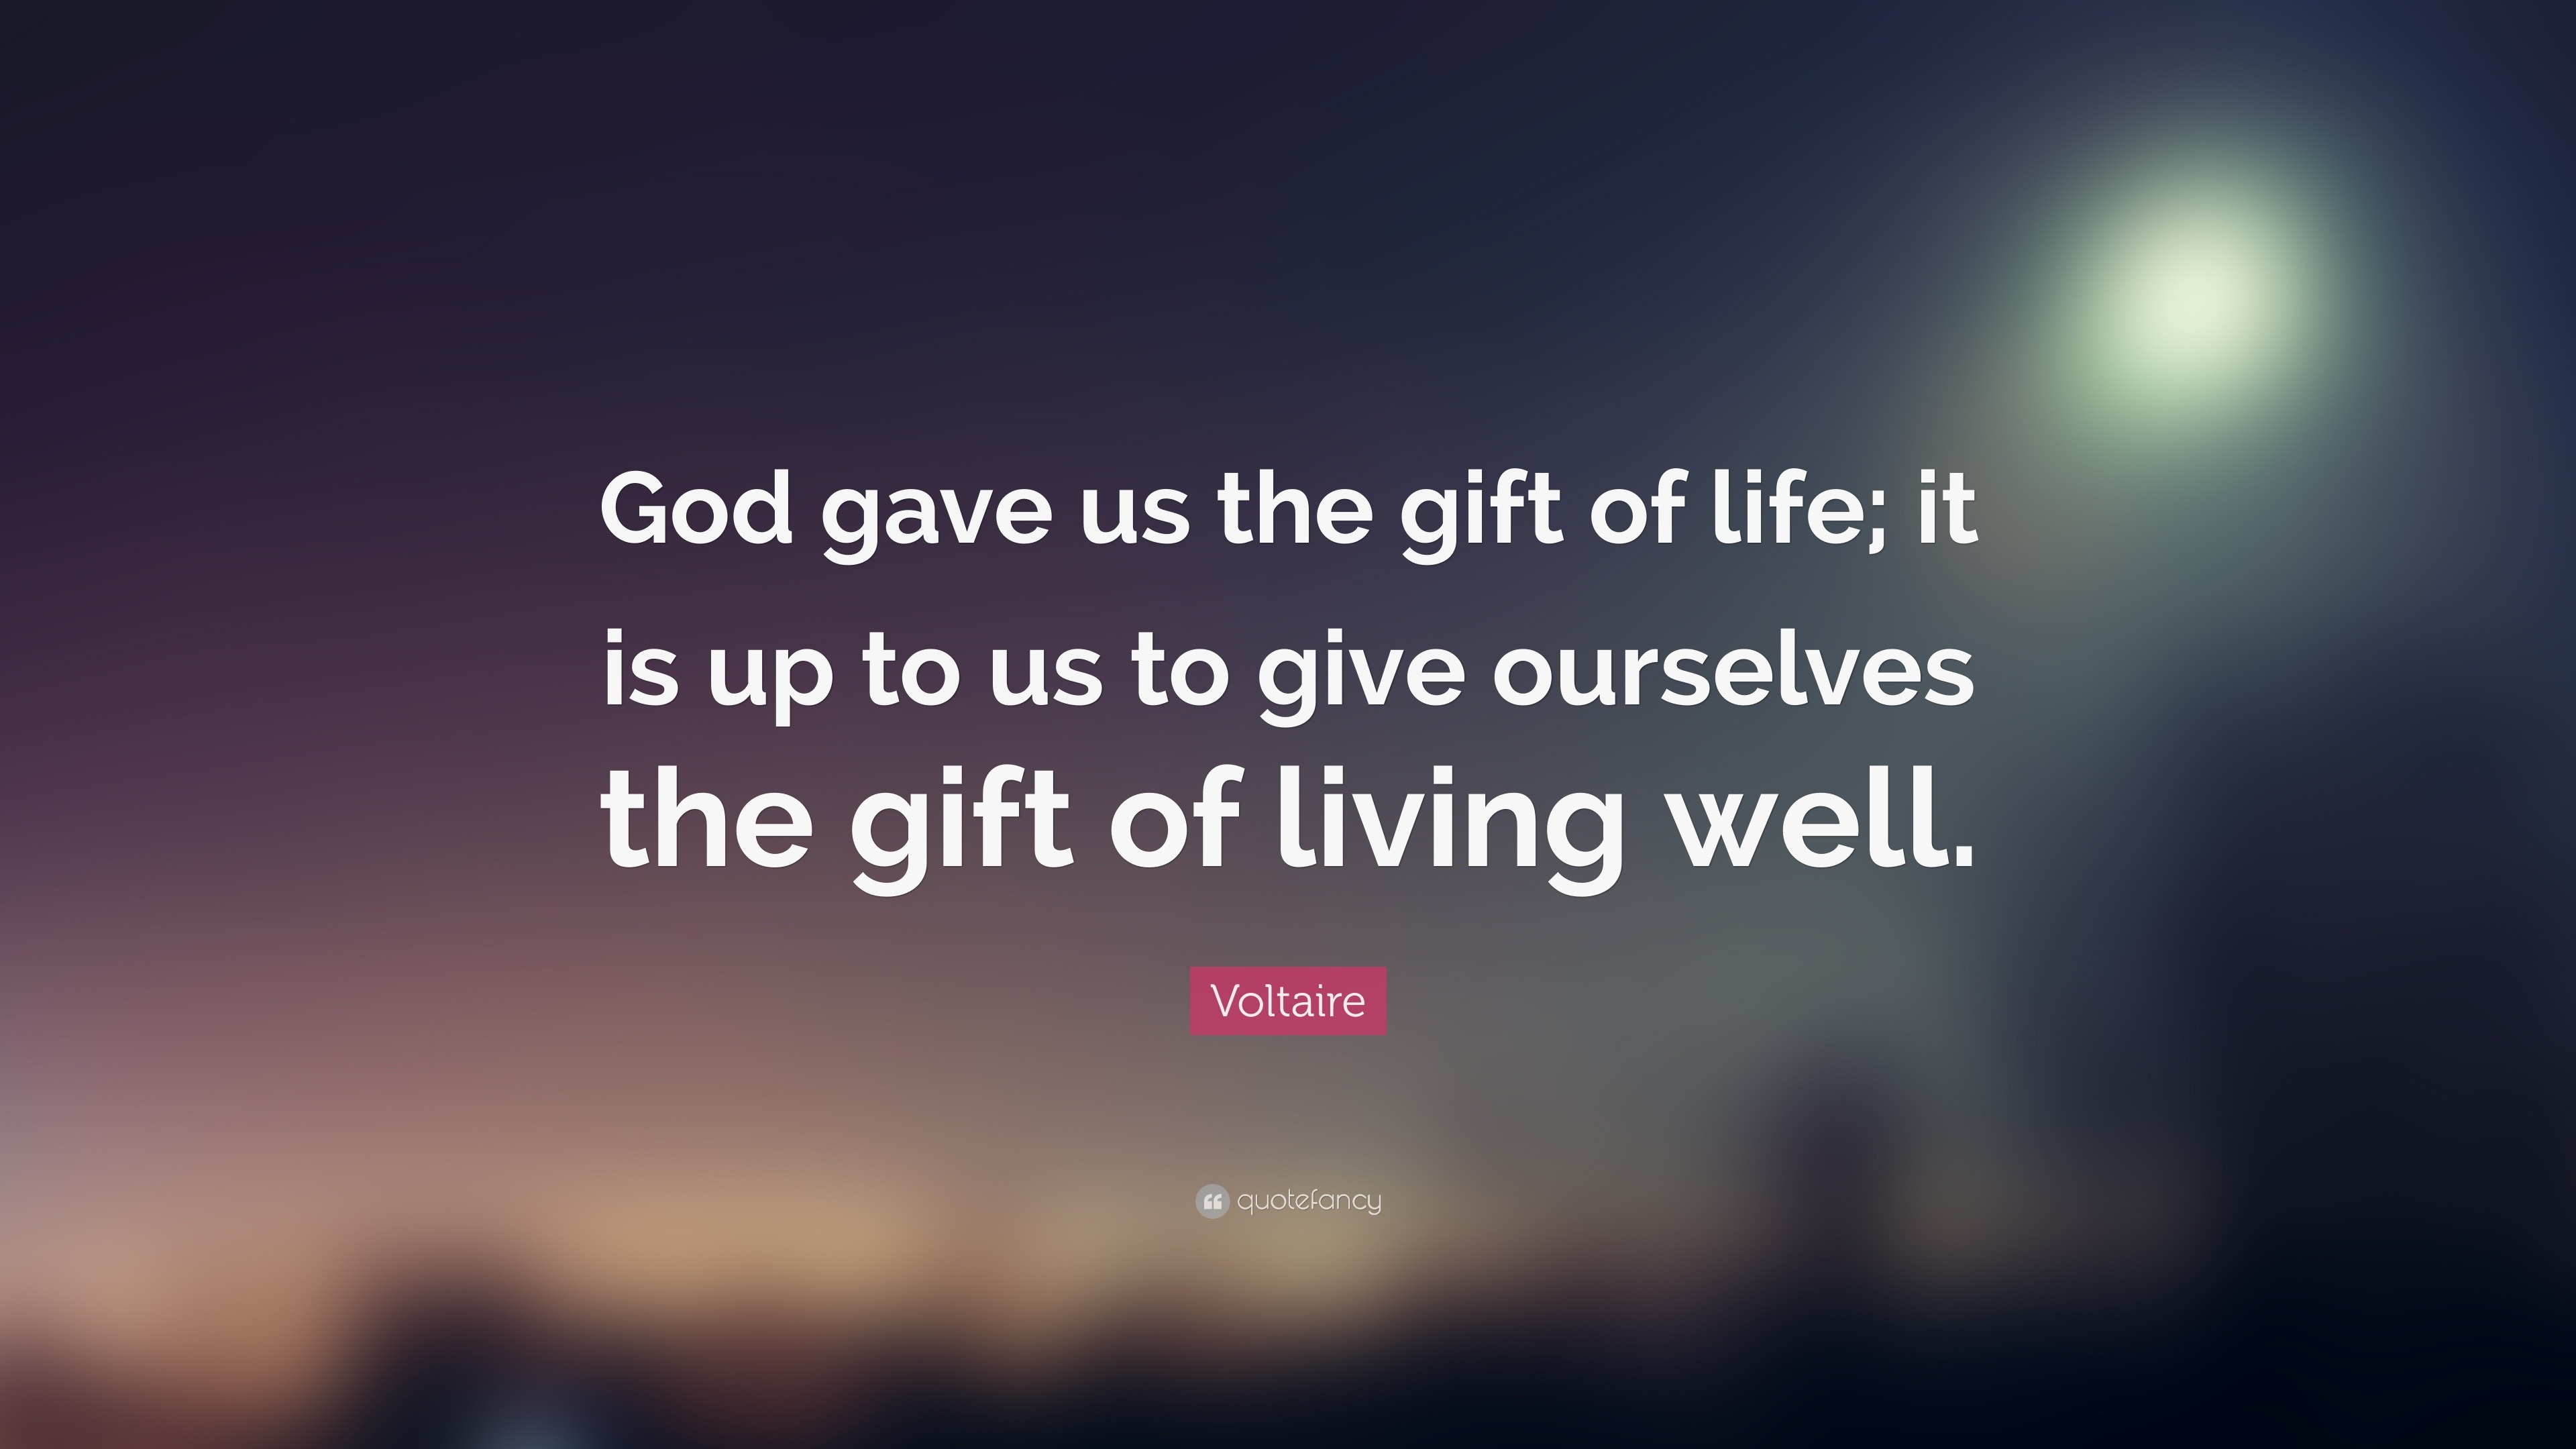 41349-Voltaire-Quote-God-gave-us-the-gift-of-life-it-is-up-to-us-to-give.jpg